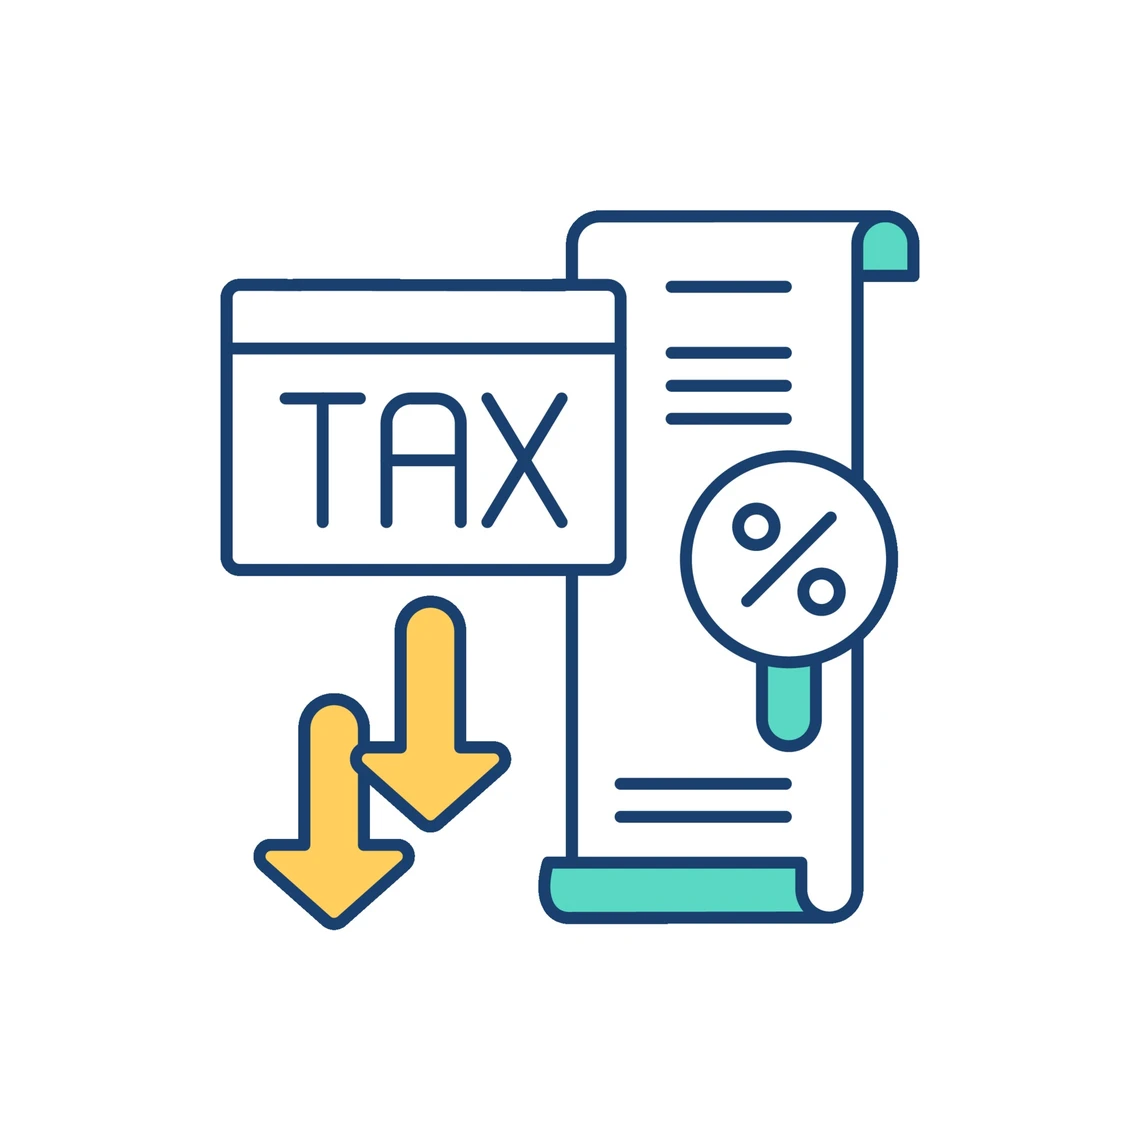 low-tax-rate-rgb-color-icon-vector